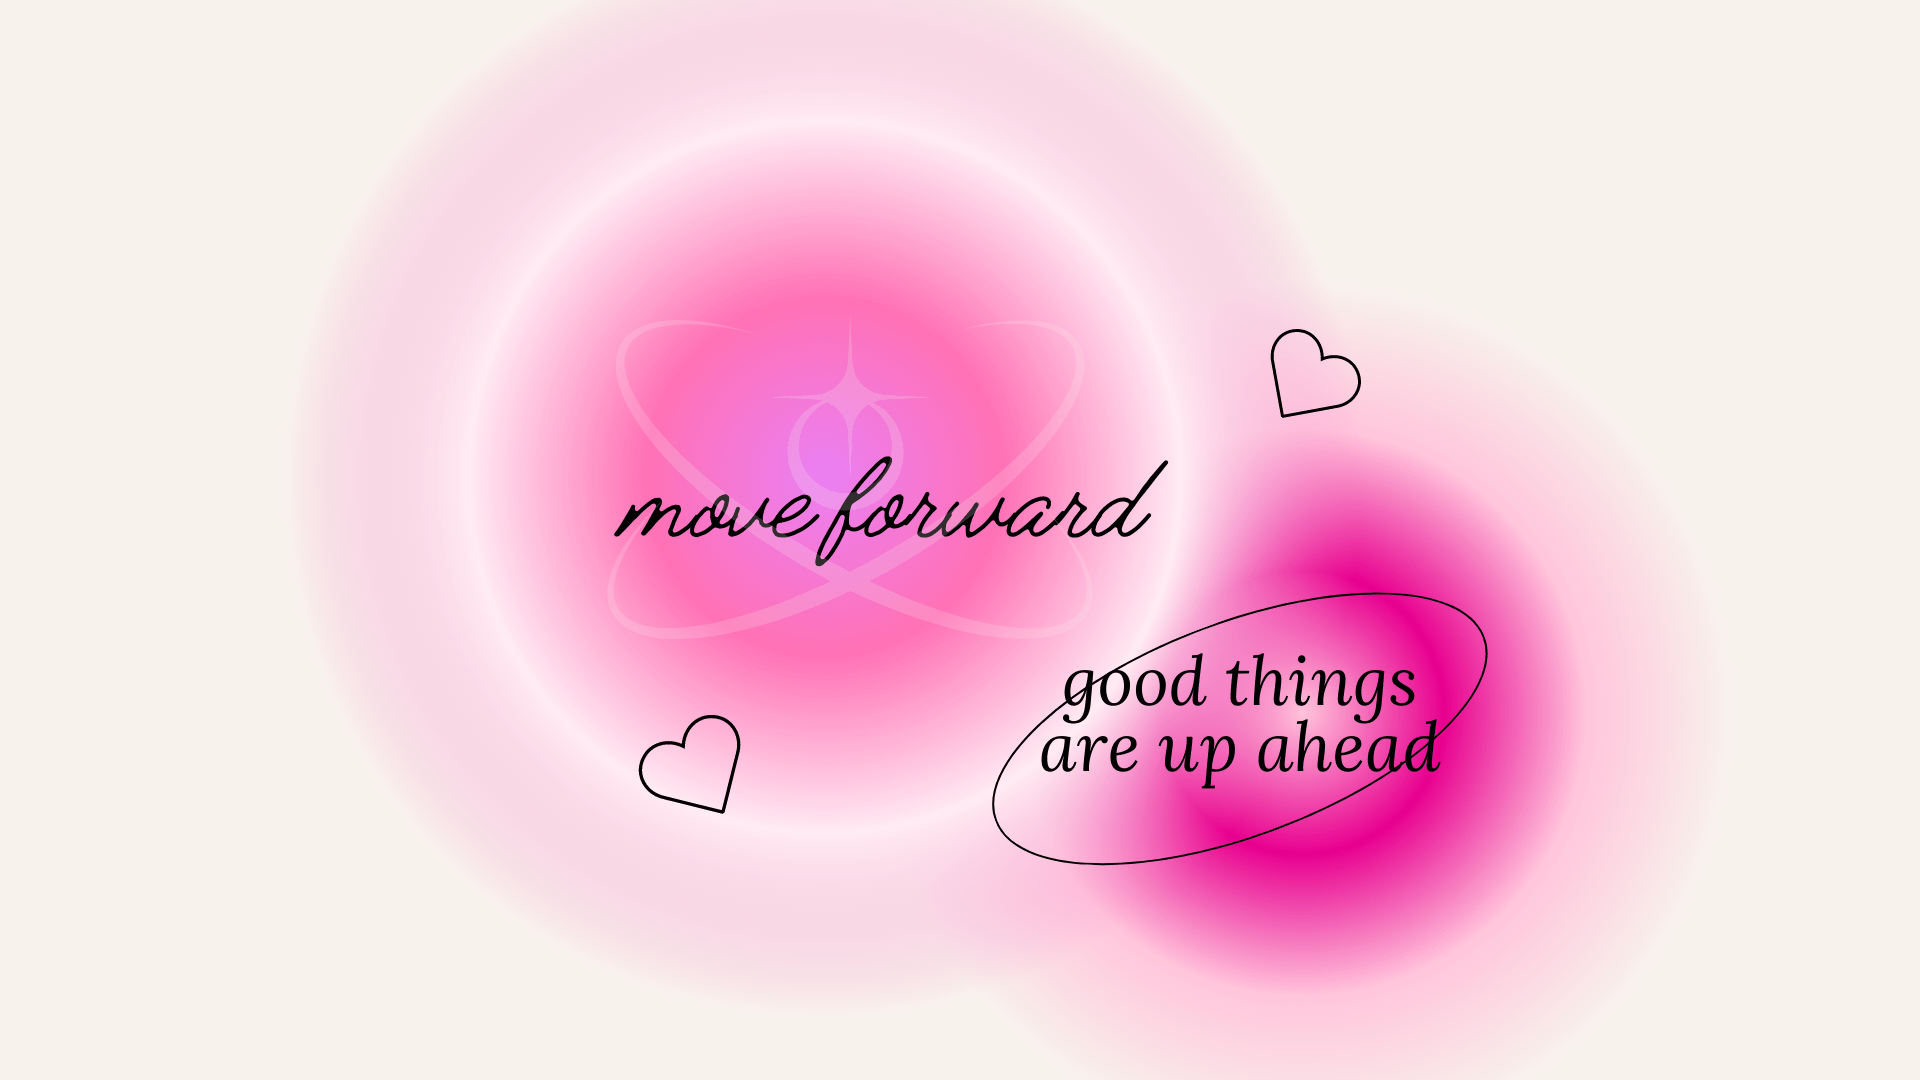 Move forward, good things are up ahead - Chromebook, pink, motivational